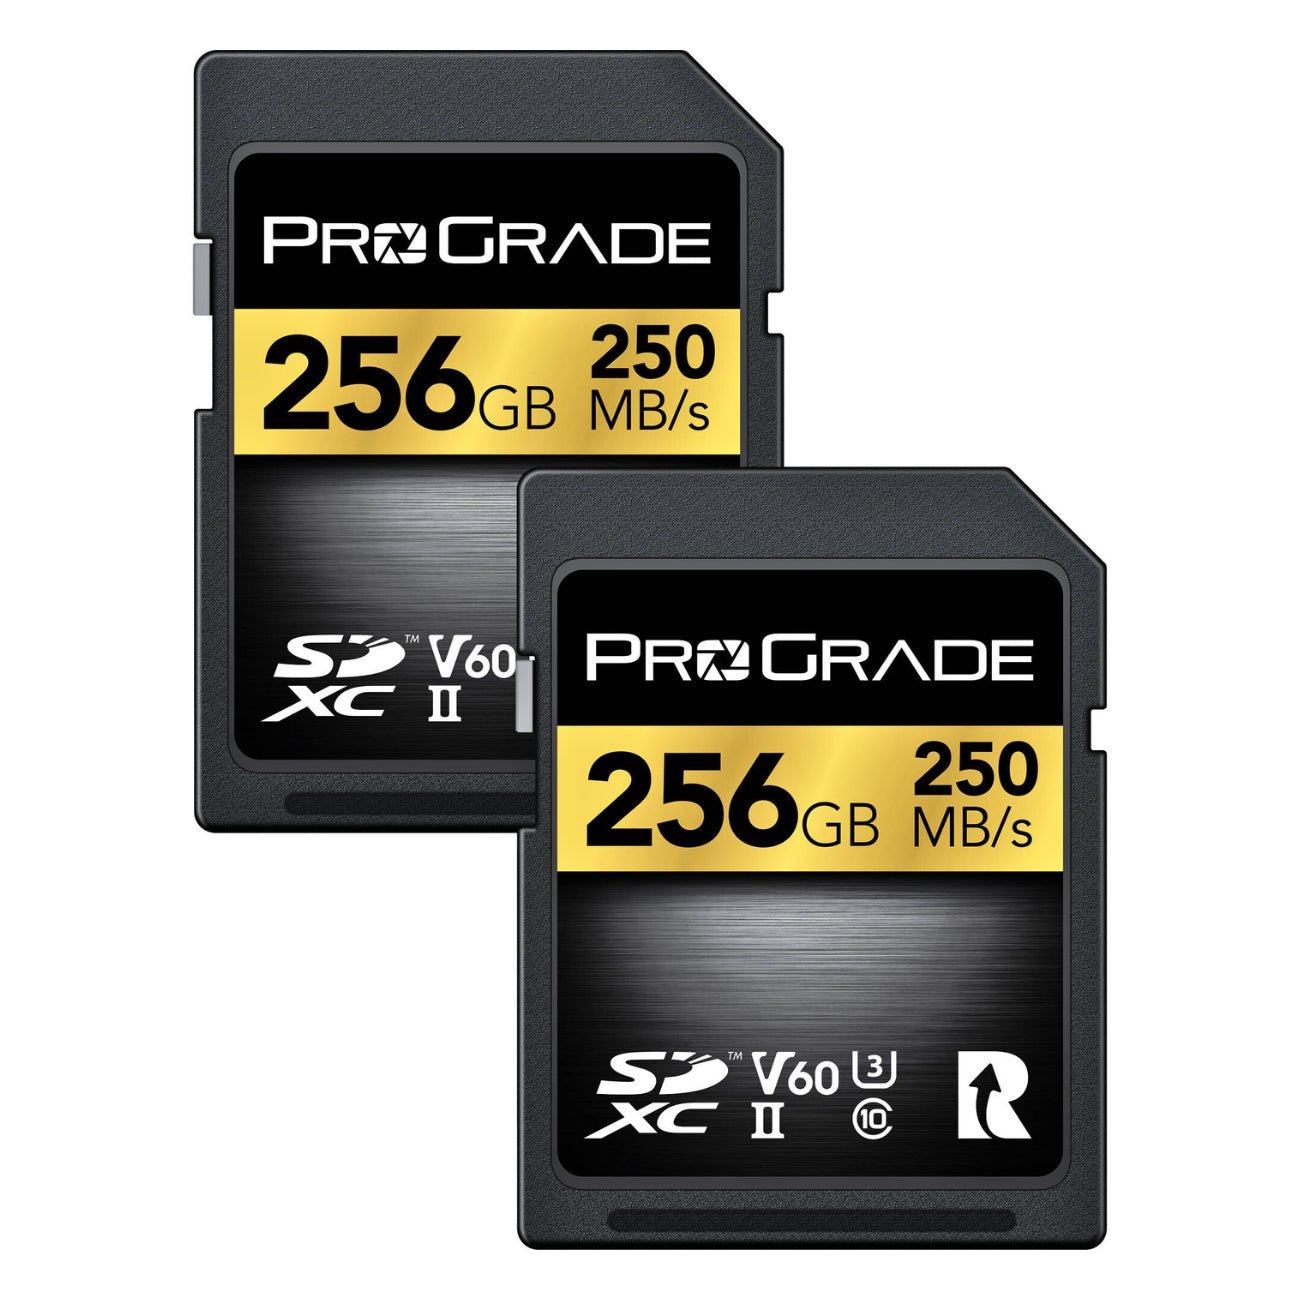 SD UHS-II 256GB Card V60 –Up to 130MB/s Write Speed and 250 MB/s Read Speed | for Professional Vloggers, Filmmakers, Photographers & Content Curators – by Prograde Digital / prograde 256gb